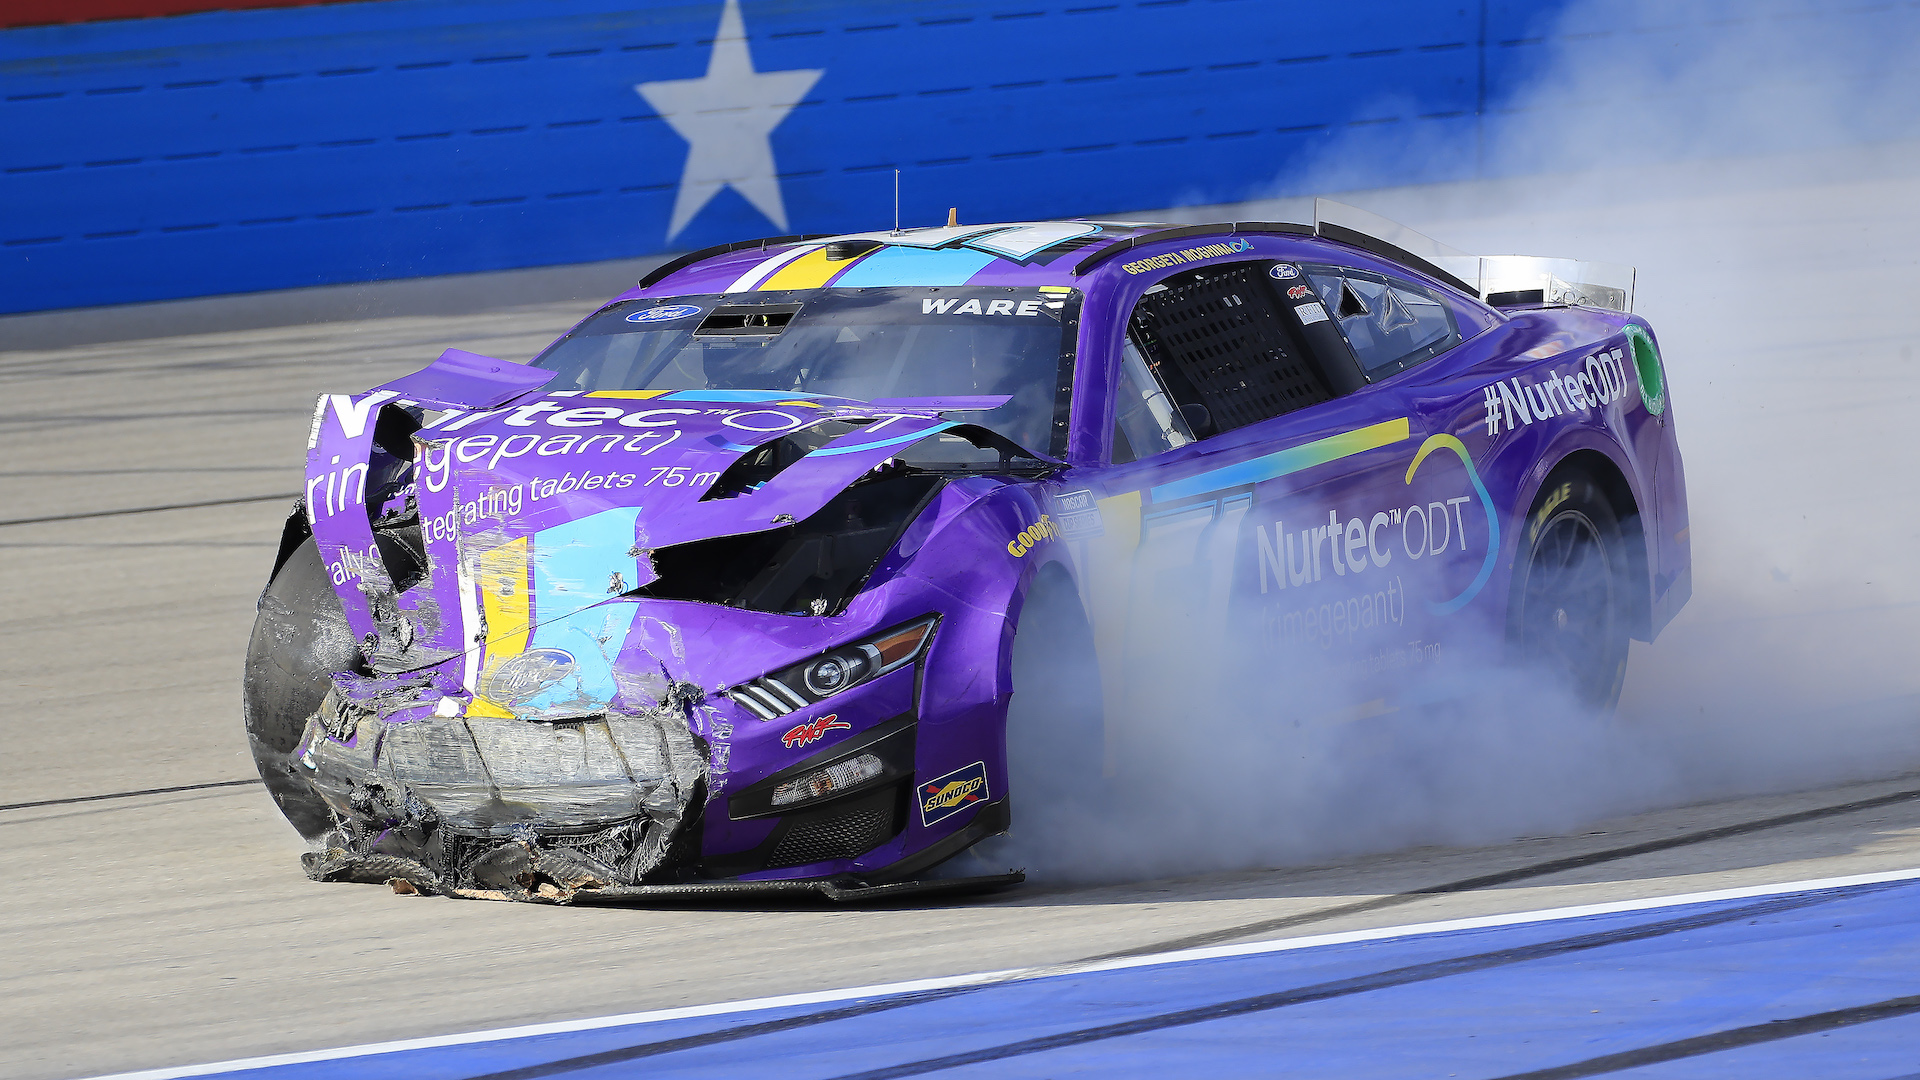 NASCAR's Next Gen Car Will Be Revised After Driver Injuries Continue